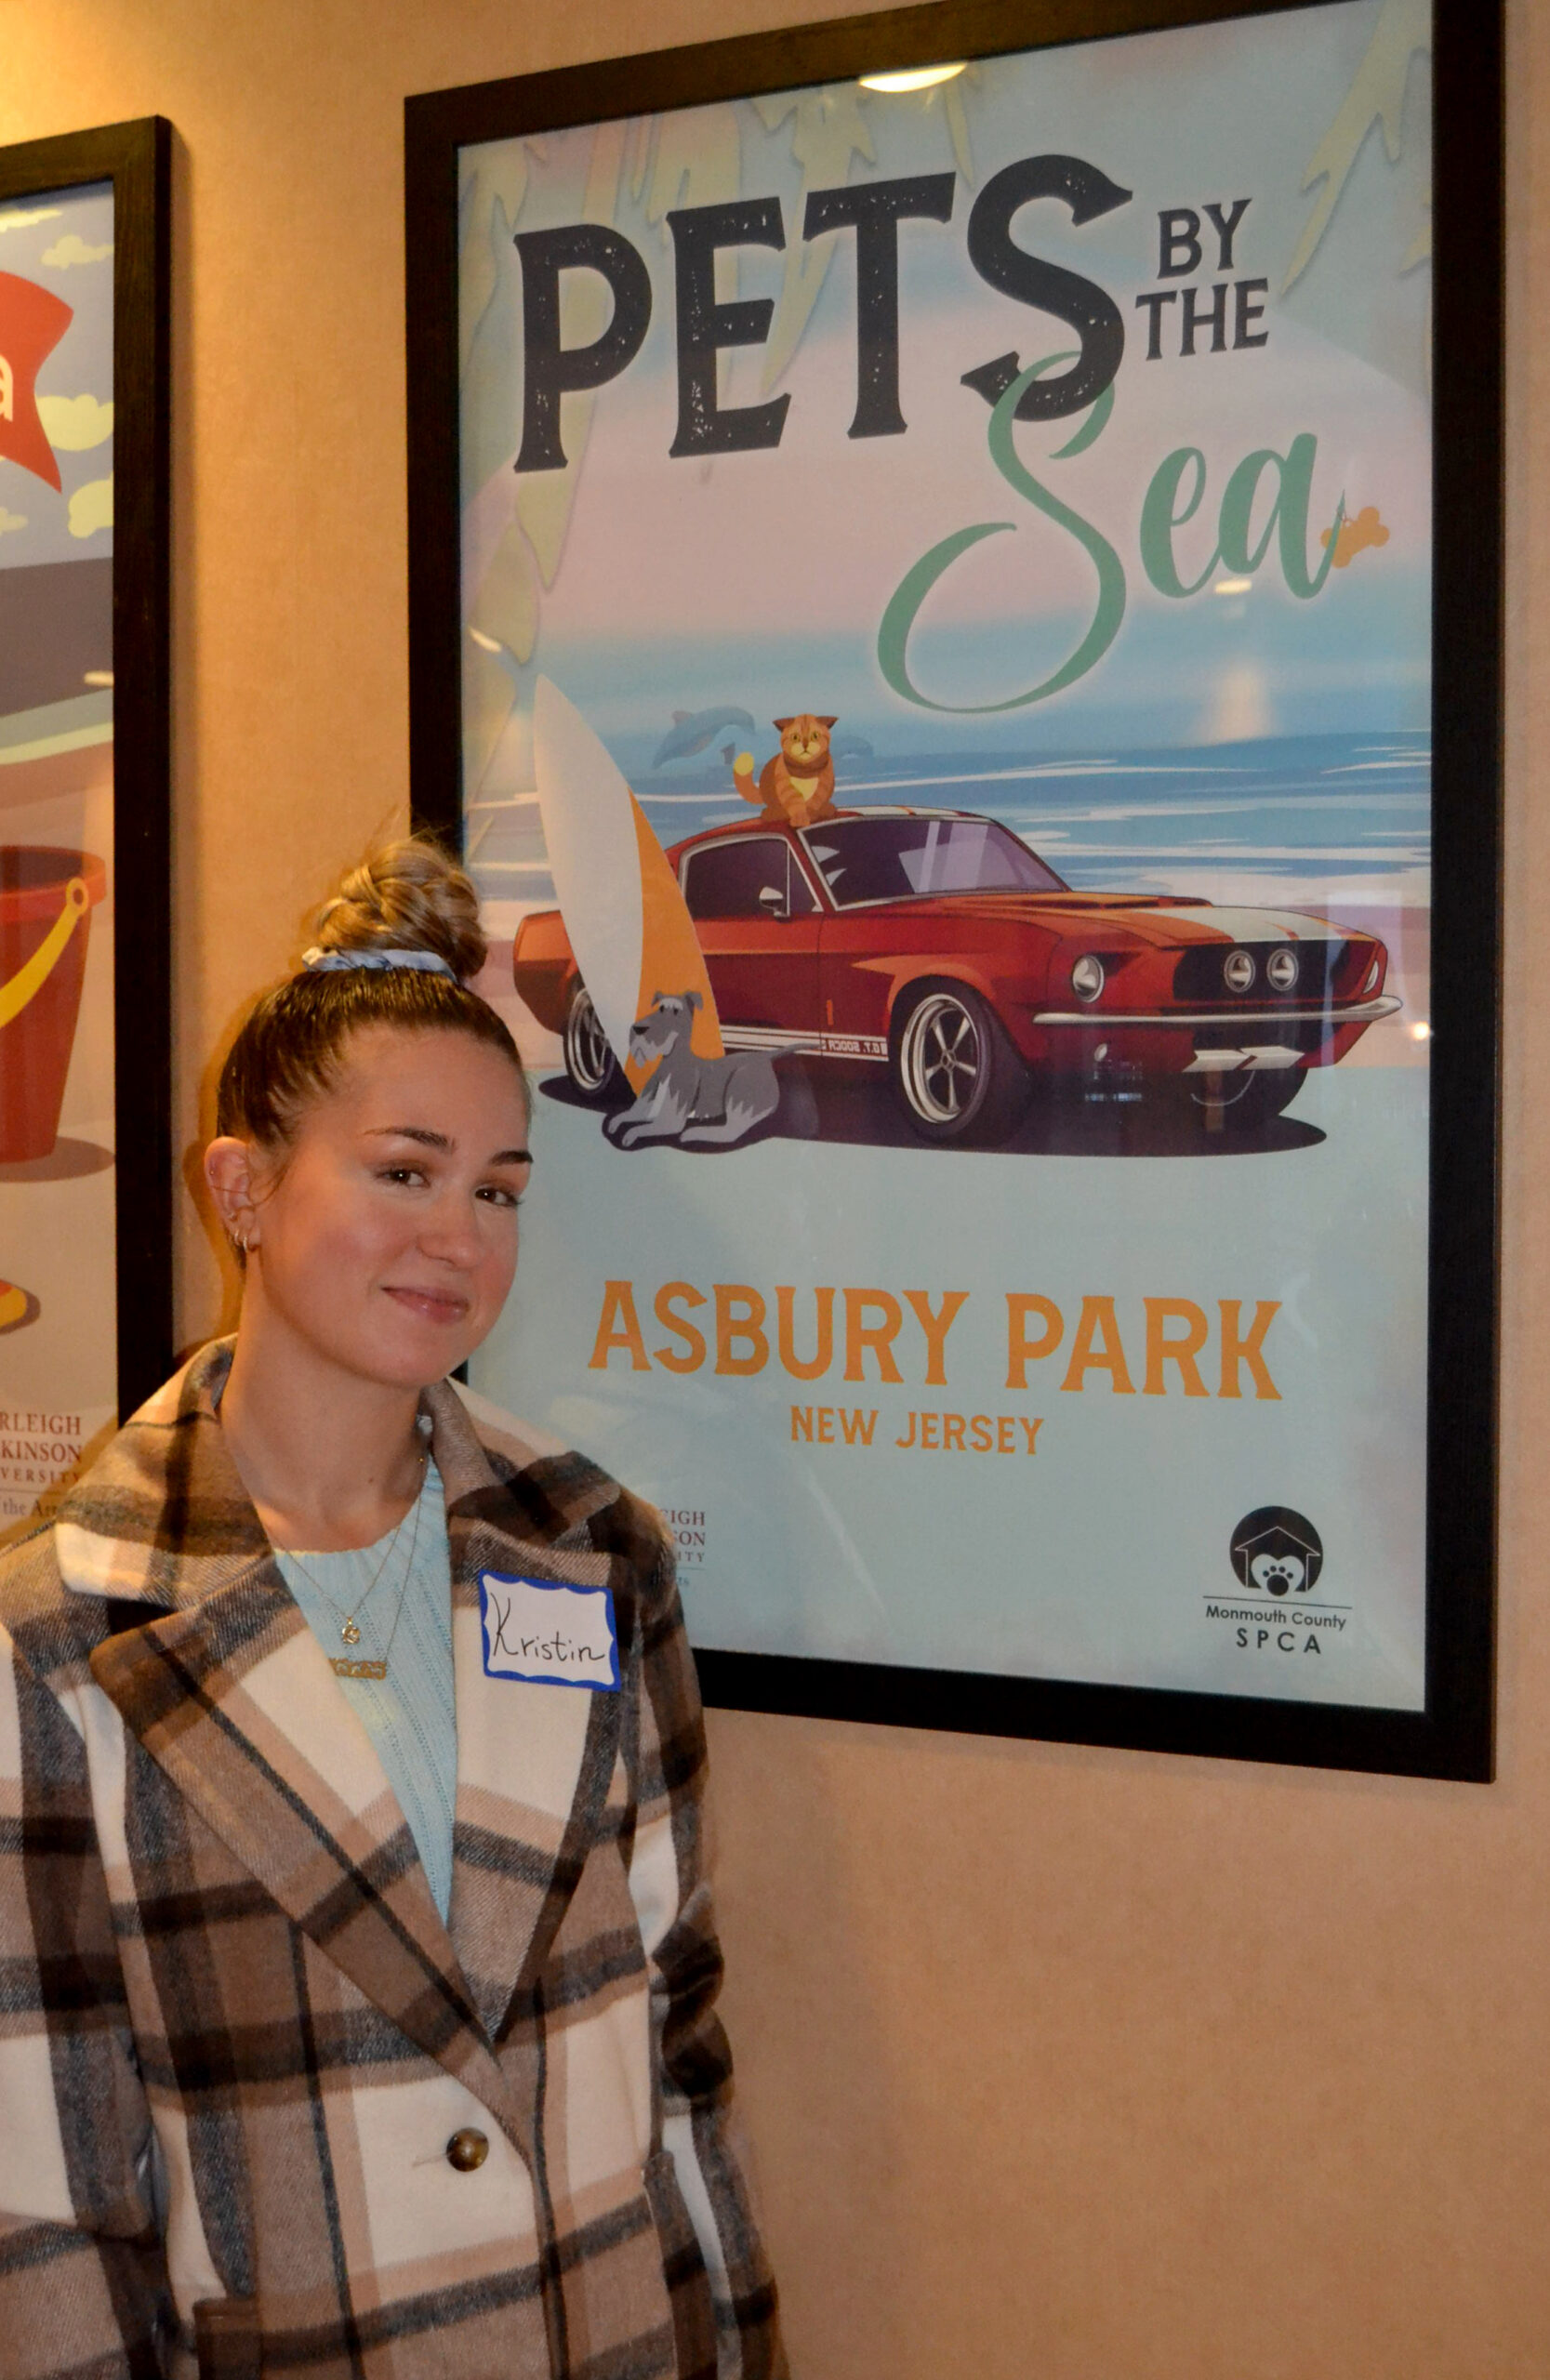 Design contest celebrates ‘Pets By the Sea’ in Asbury Park